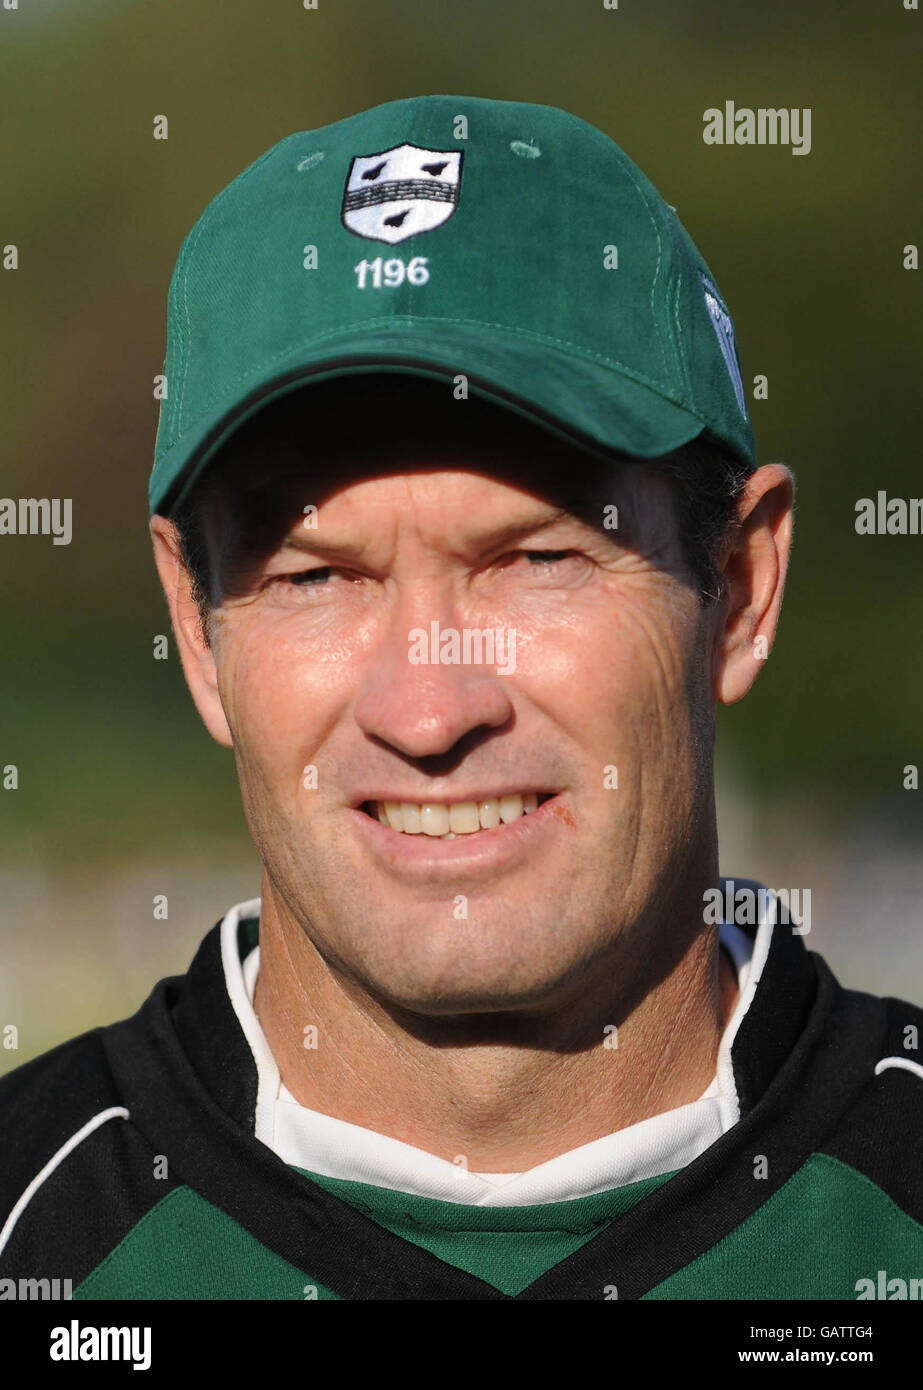 Worcestershire Royals' Graeme Hick wears the cap presented to him during the interval against Somerset Sabres that has the number 1196 his record breaking appearances printed on it during the Twenty20 Cup match at County Ground, New Road, Worcester. Stock Photo